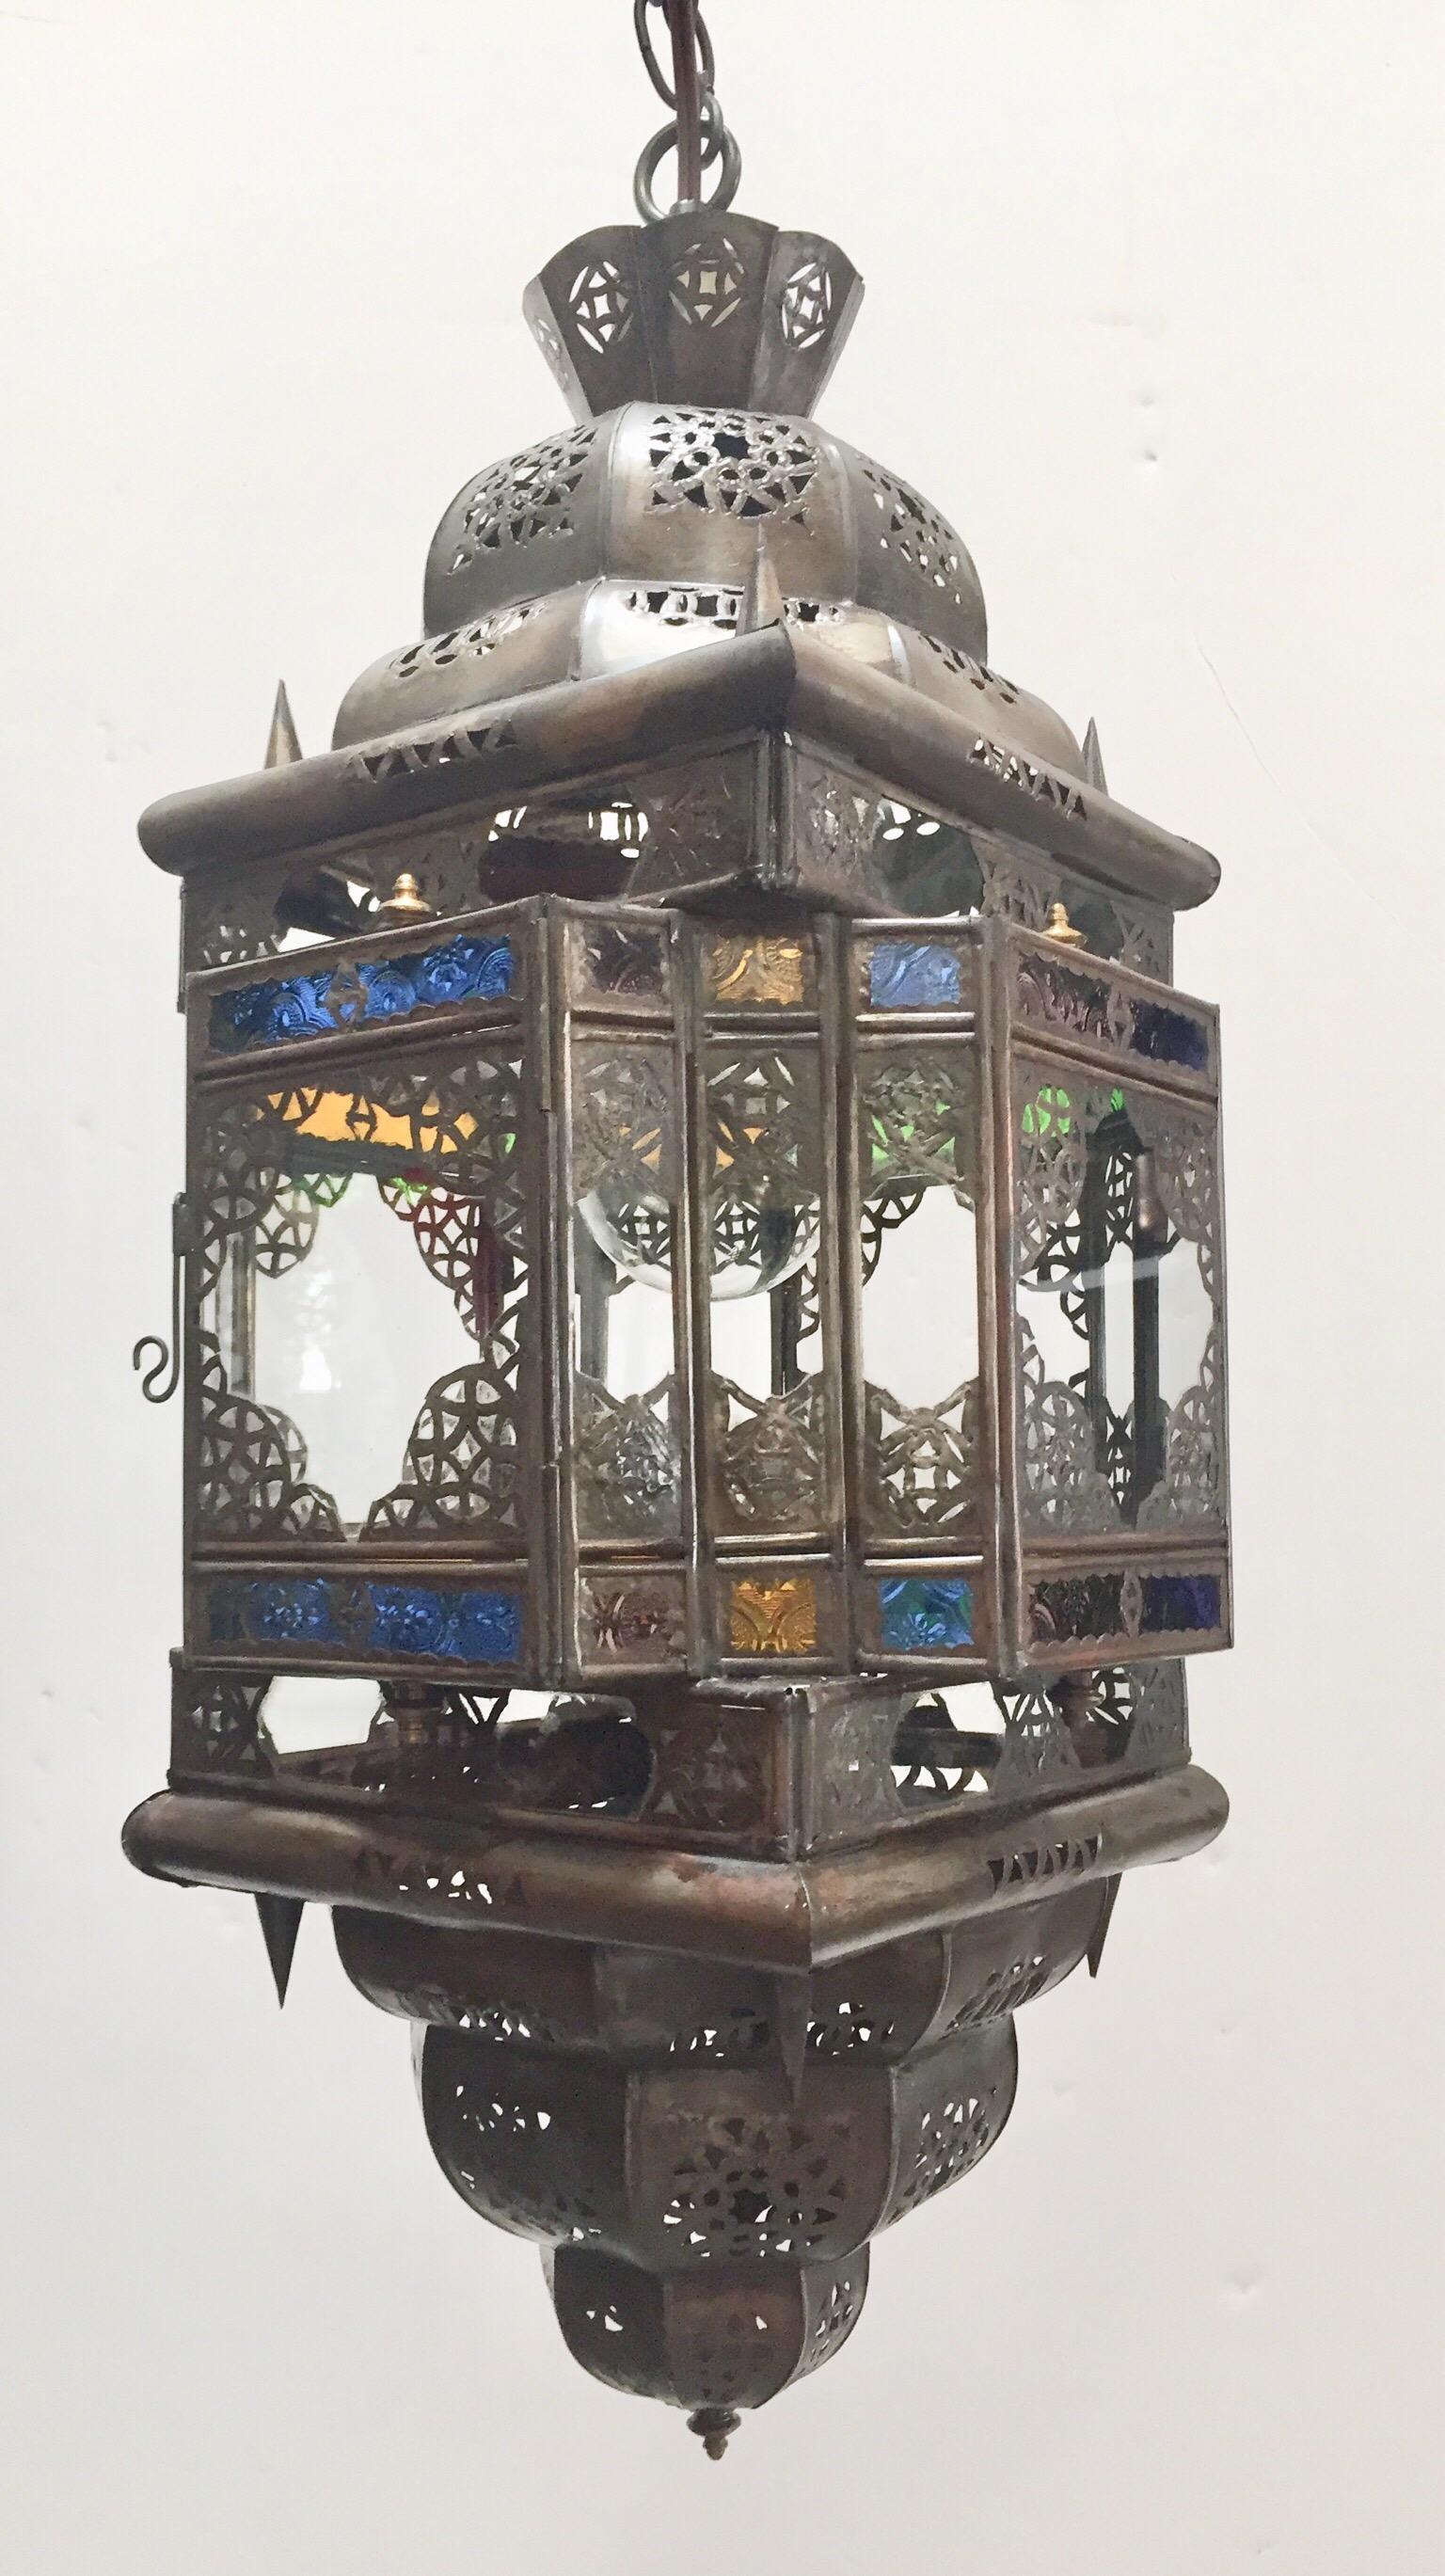 Stylish handcrafted Moroccan pendant with multi-color molded glass and metal with an antique bronze finish.
Moorish style with small cut-glass with open metal filigree work Moorish design in diamond shape.
Vintage Moroccan Hanging Lantern Clear and